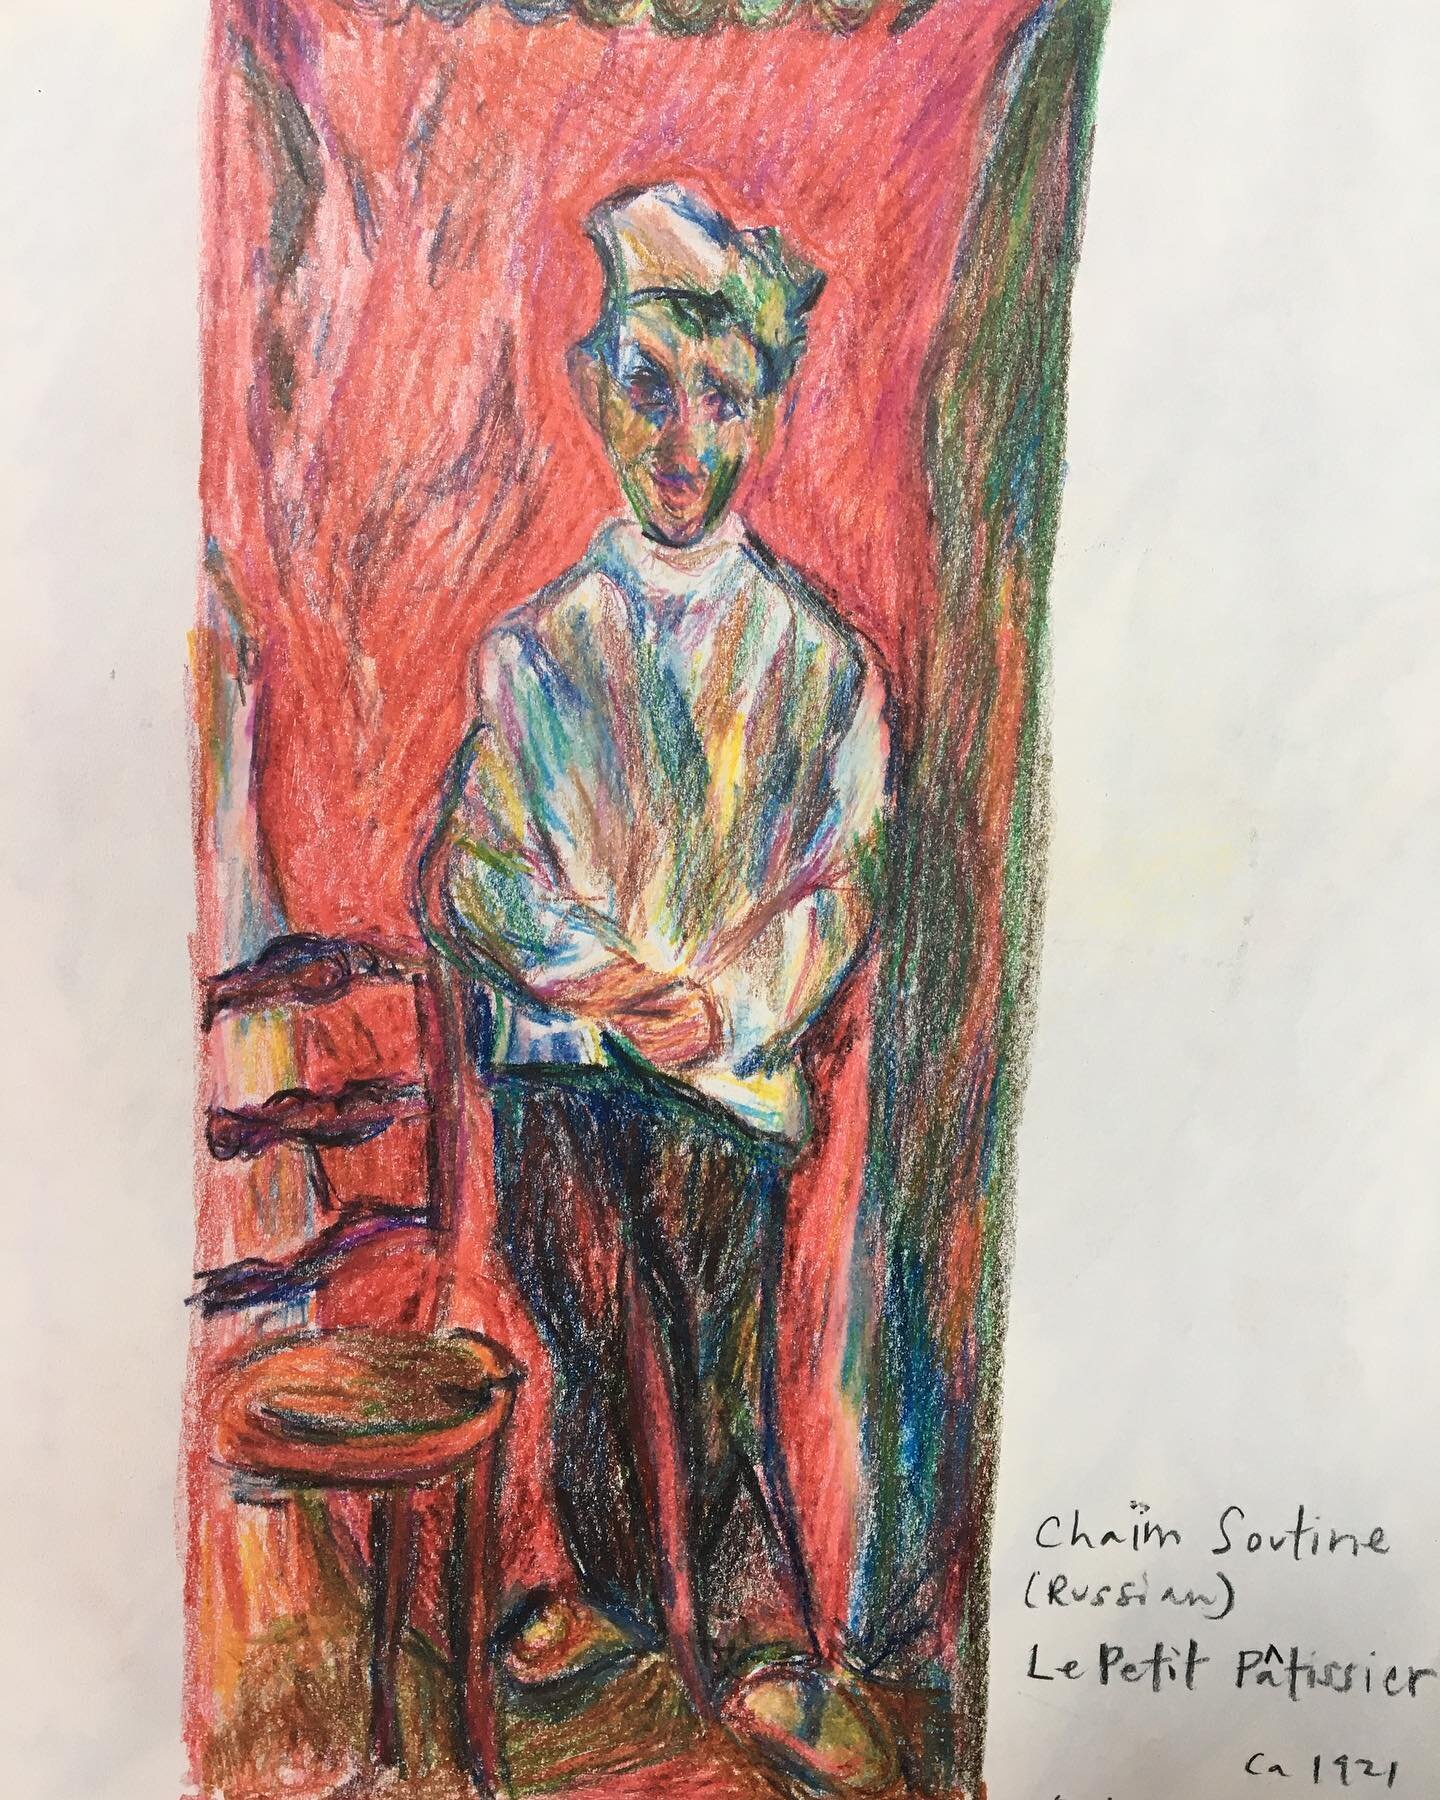 This guy, &ldquo;Le Petit P&acirc;tissier&rdquo; by Cha&iuml;m Soutine, is where I discovered how to use colored pencils in a painterly way. Born out of necessity (can&rsquo;t bring paint to the Portland Art Museum) and opportunity (asked to teach a 